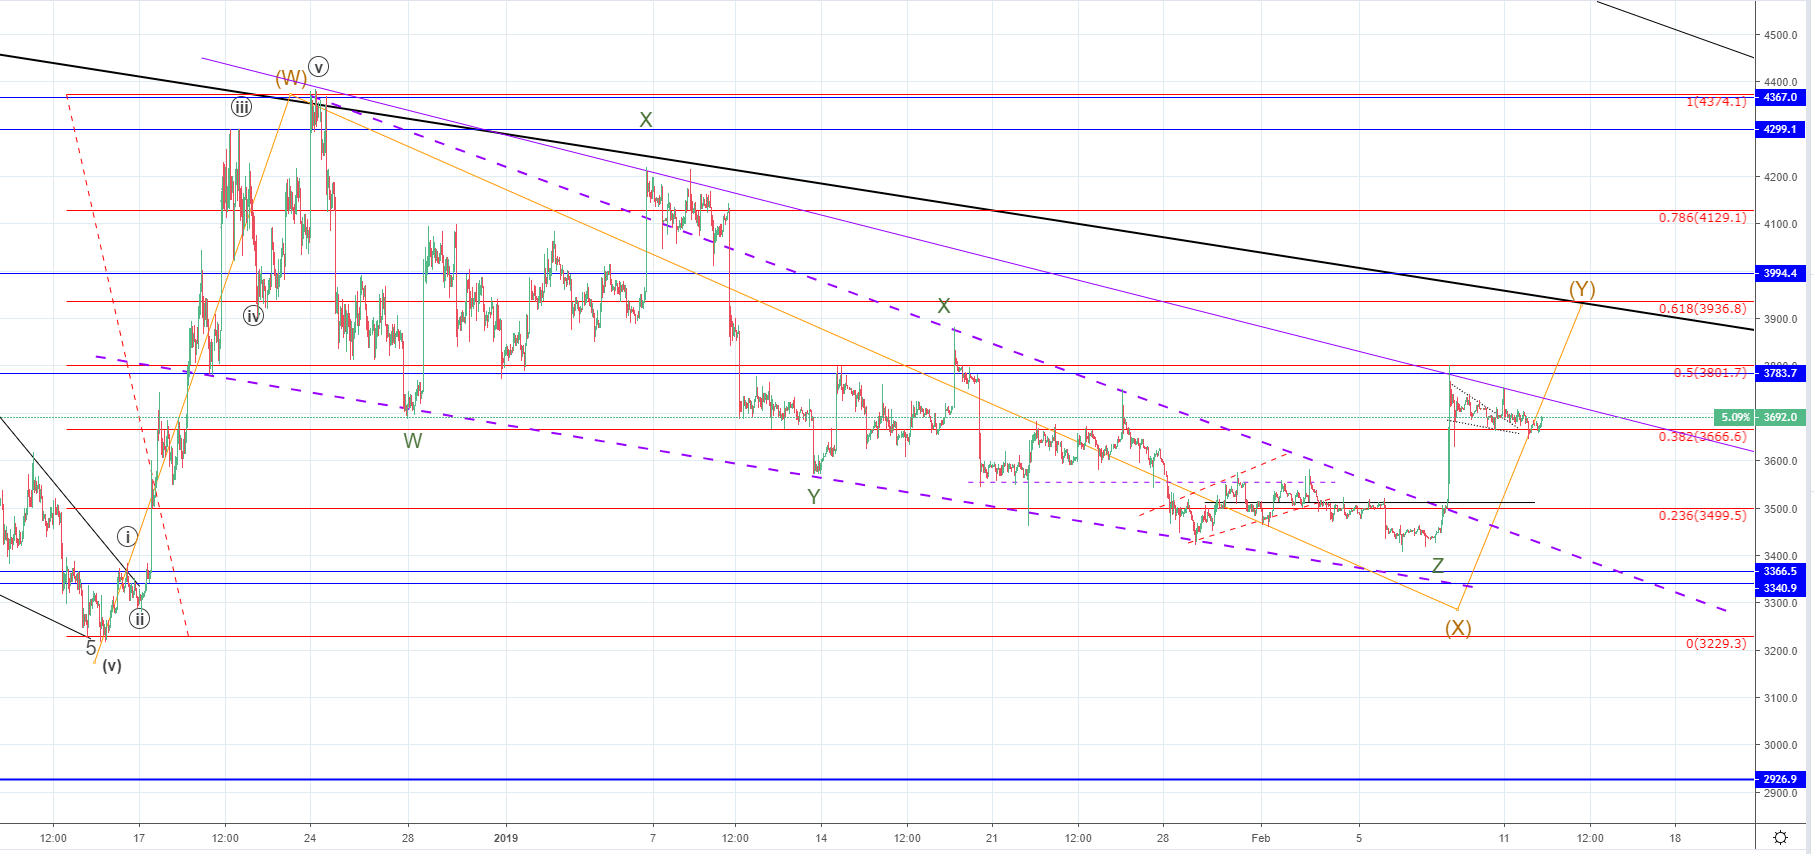 BTC/USD and XRP/USD in a minor retracement